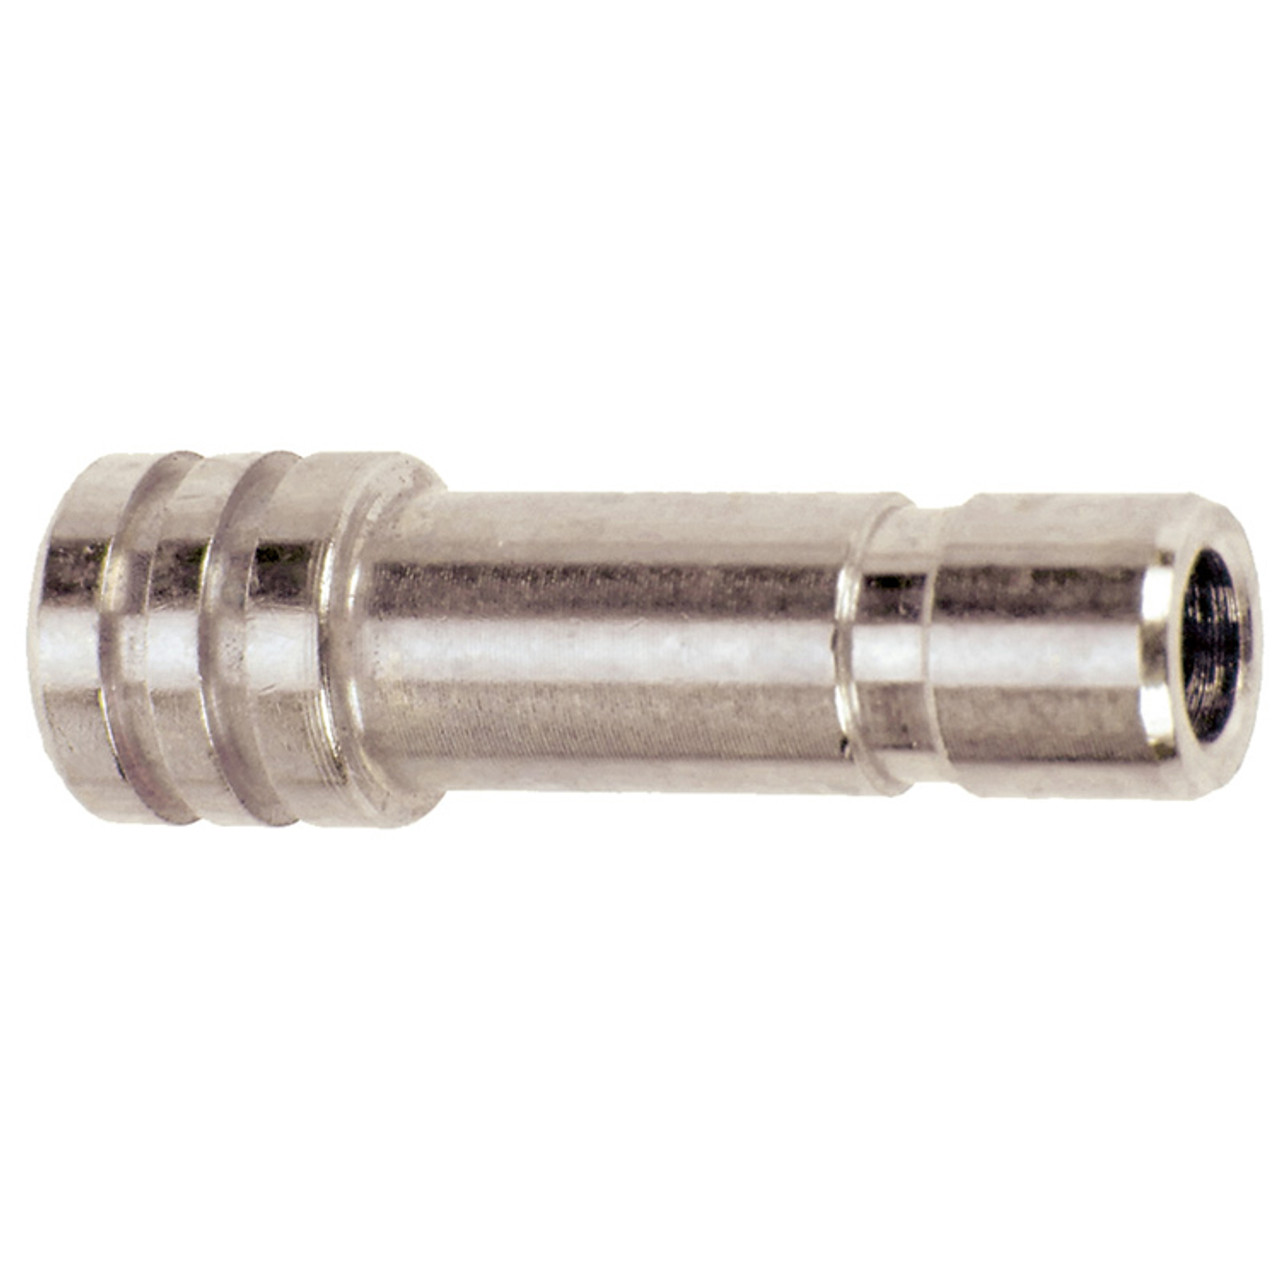 1/8" Nickel Plated Brass Push-To-Connect Plug   G6100P-02